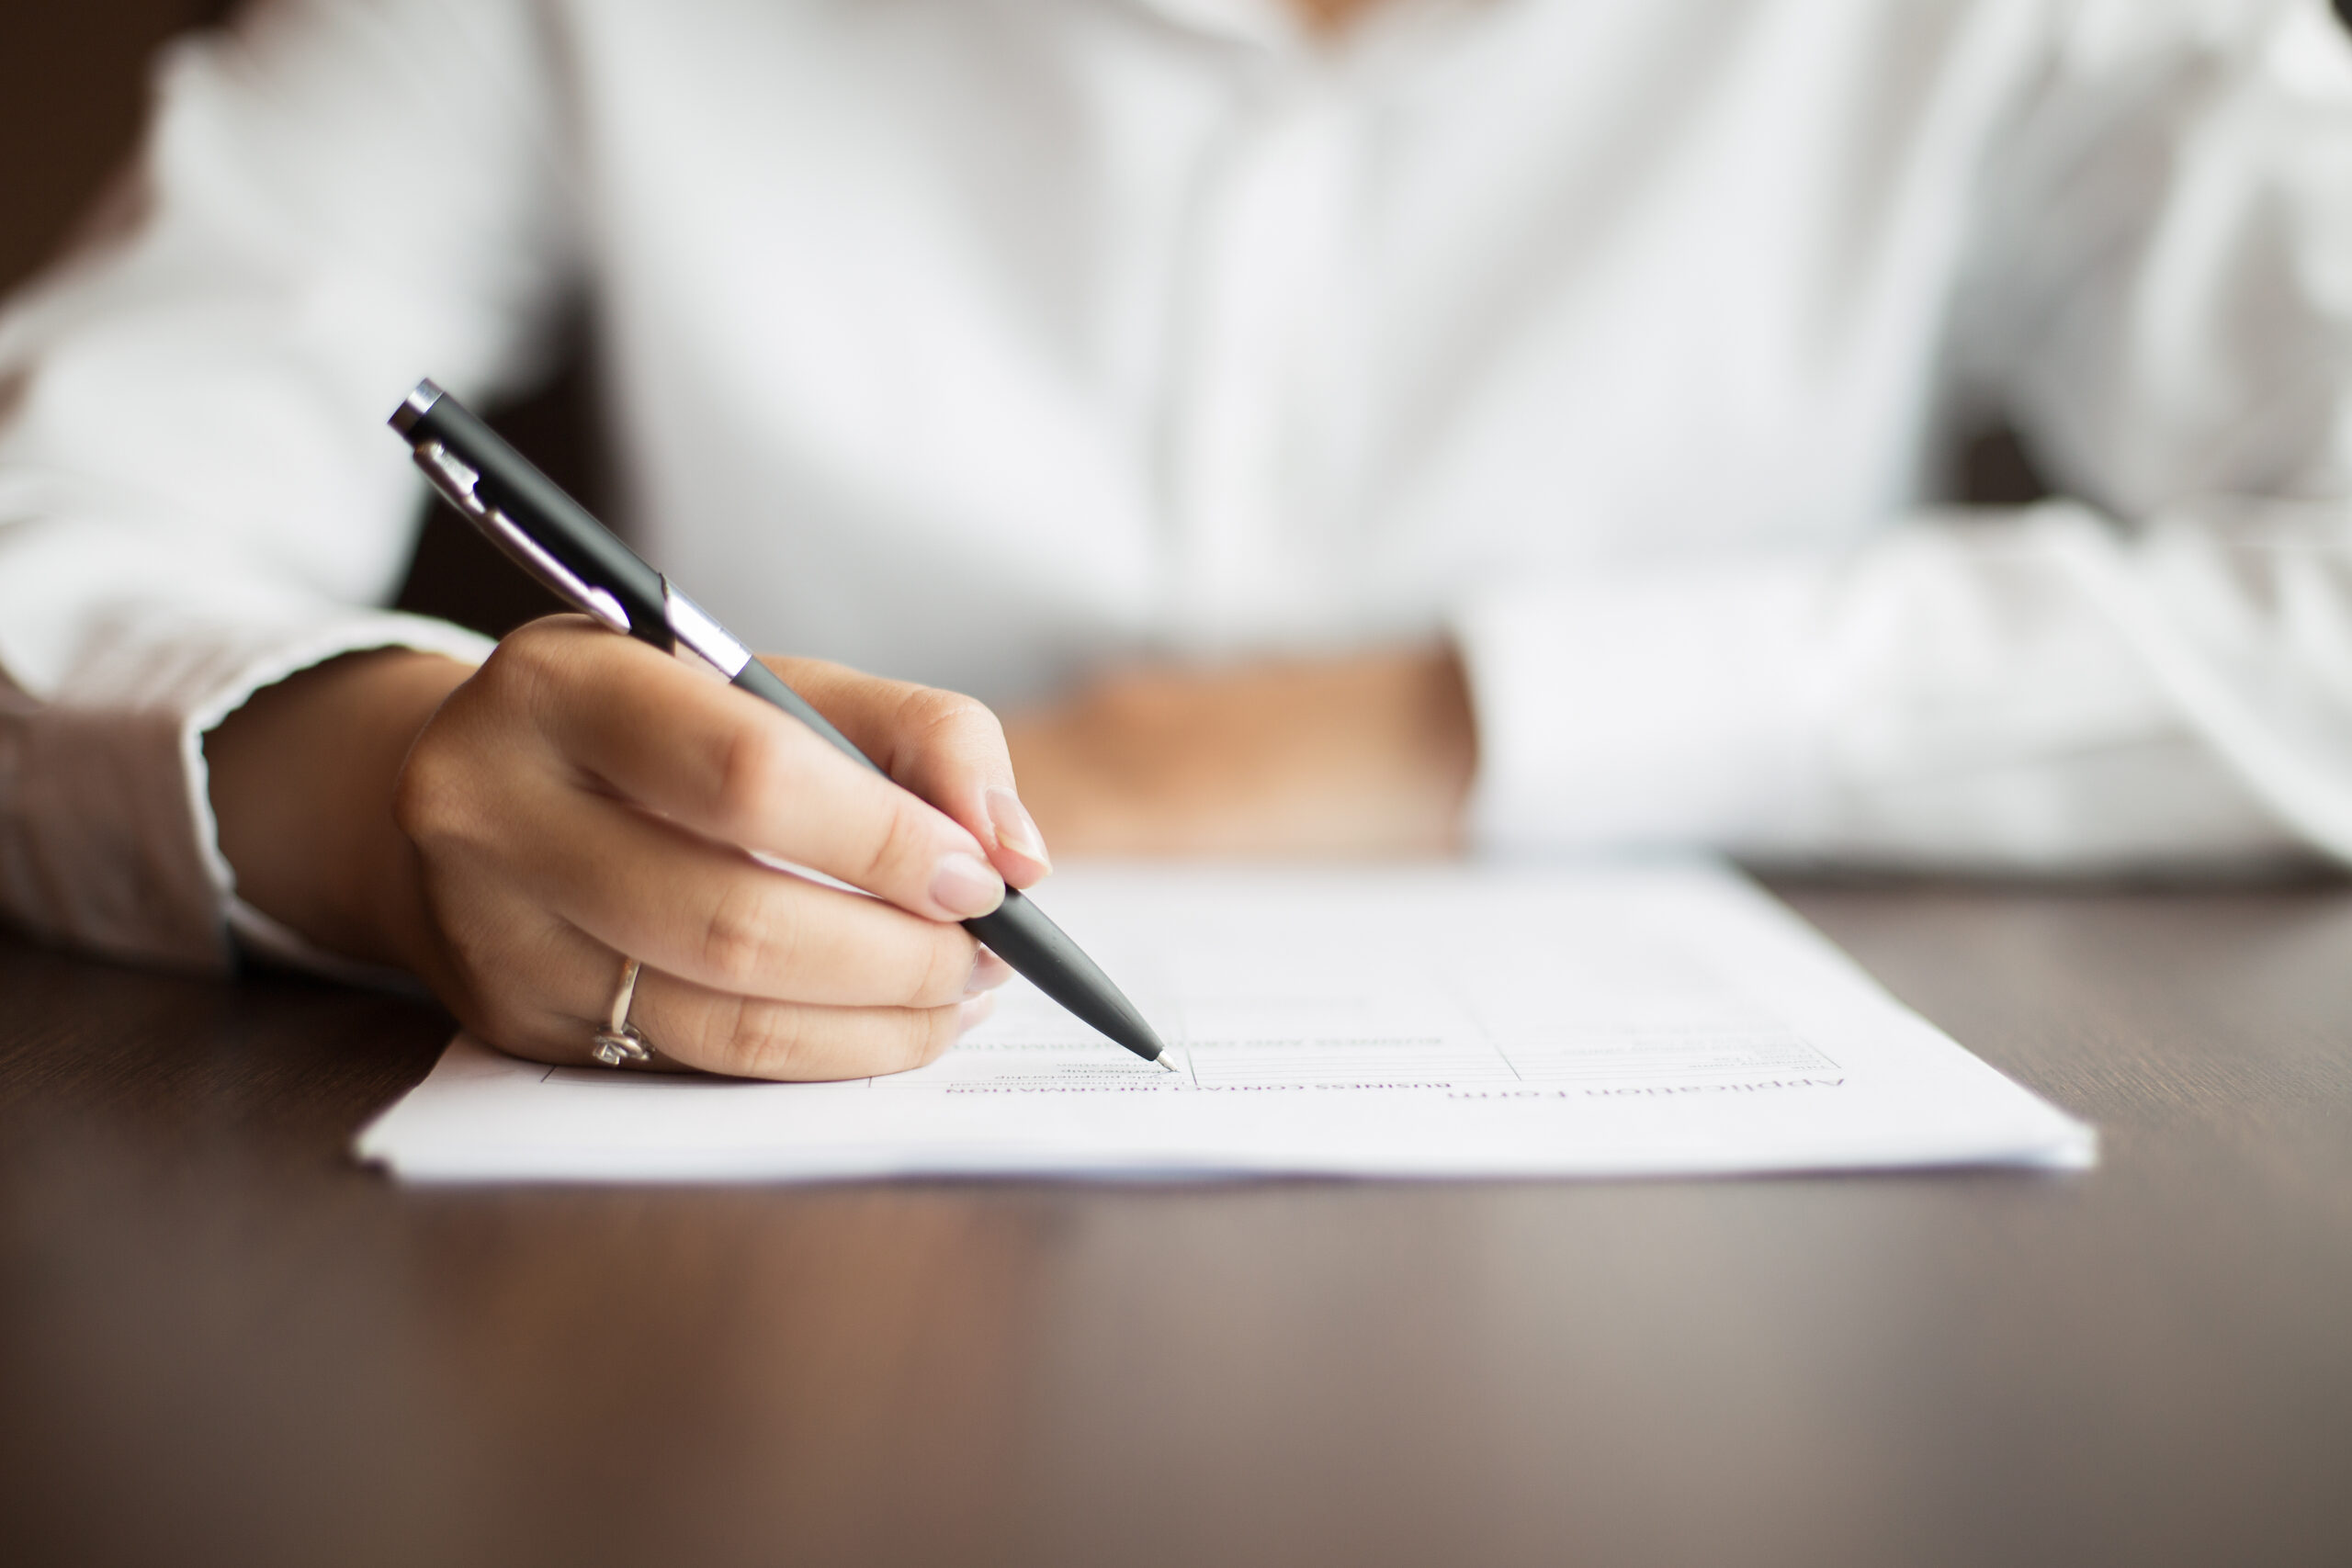 Hand of businesswoman writing on document at table